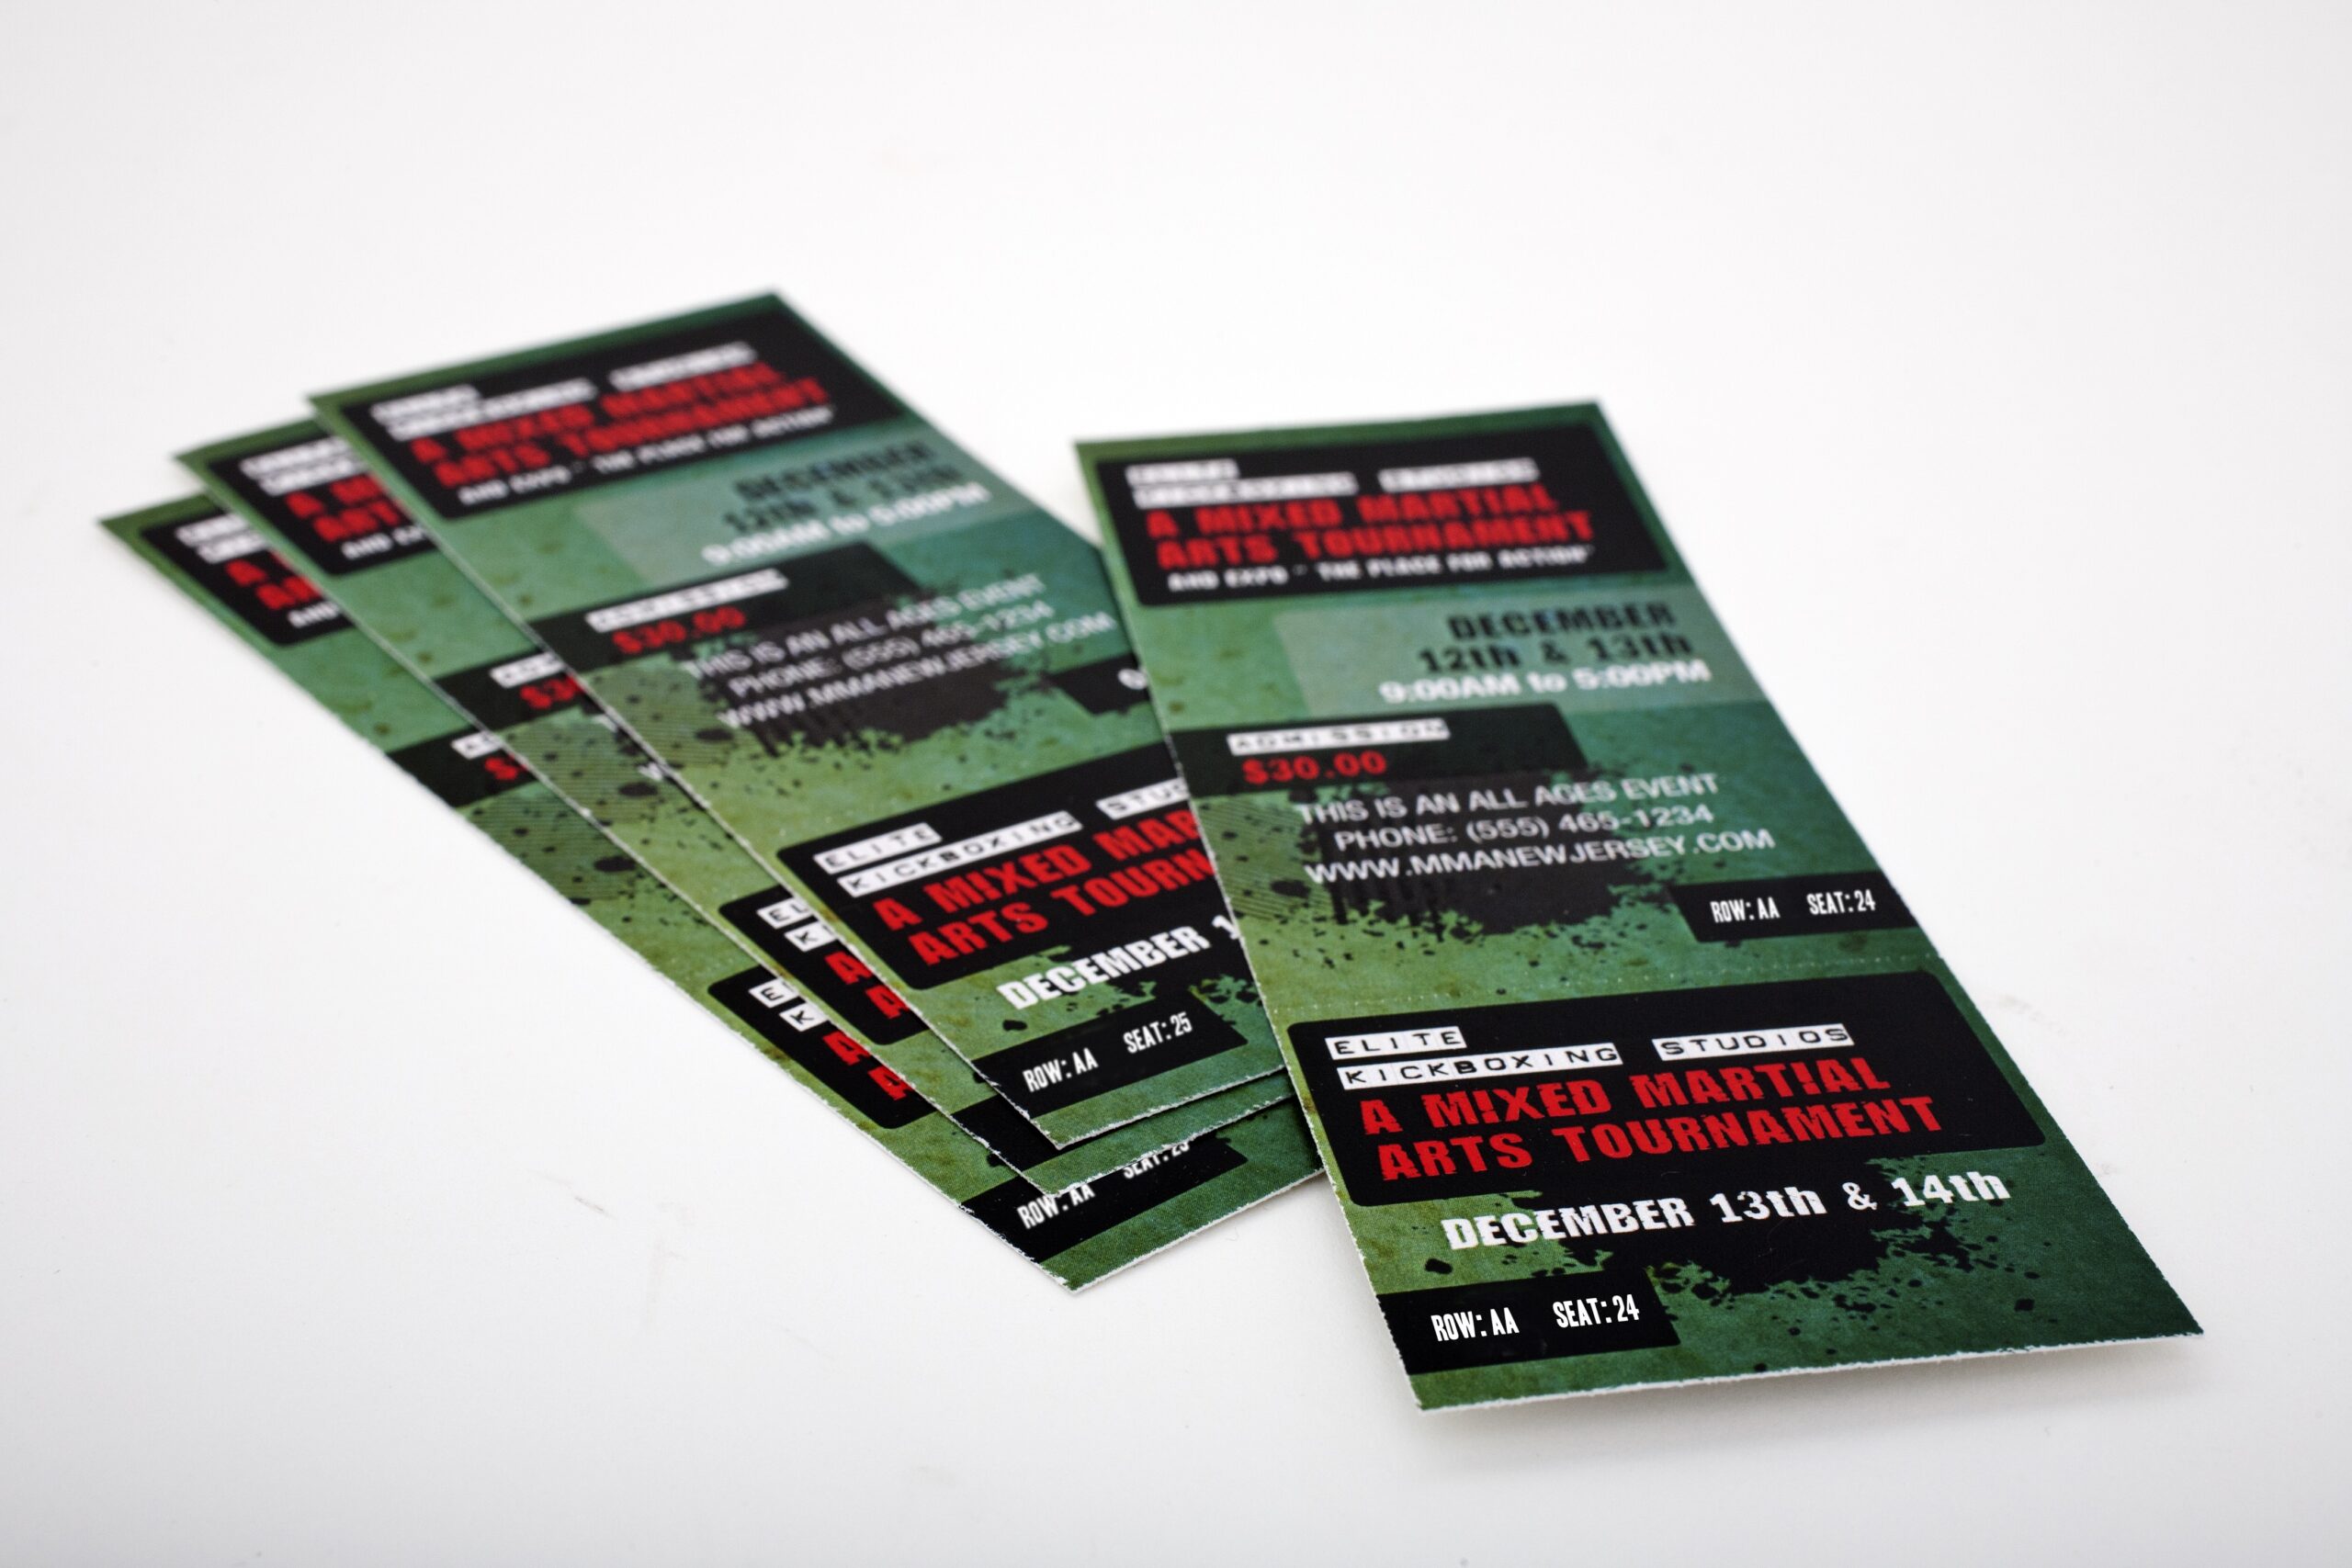 Reserved seating event tickets for an MMA match. 